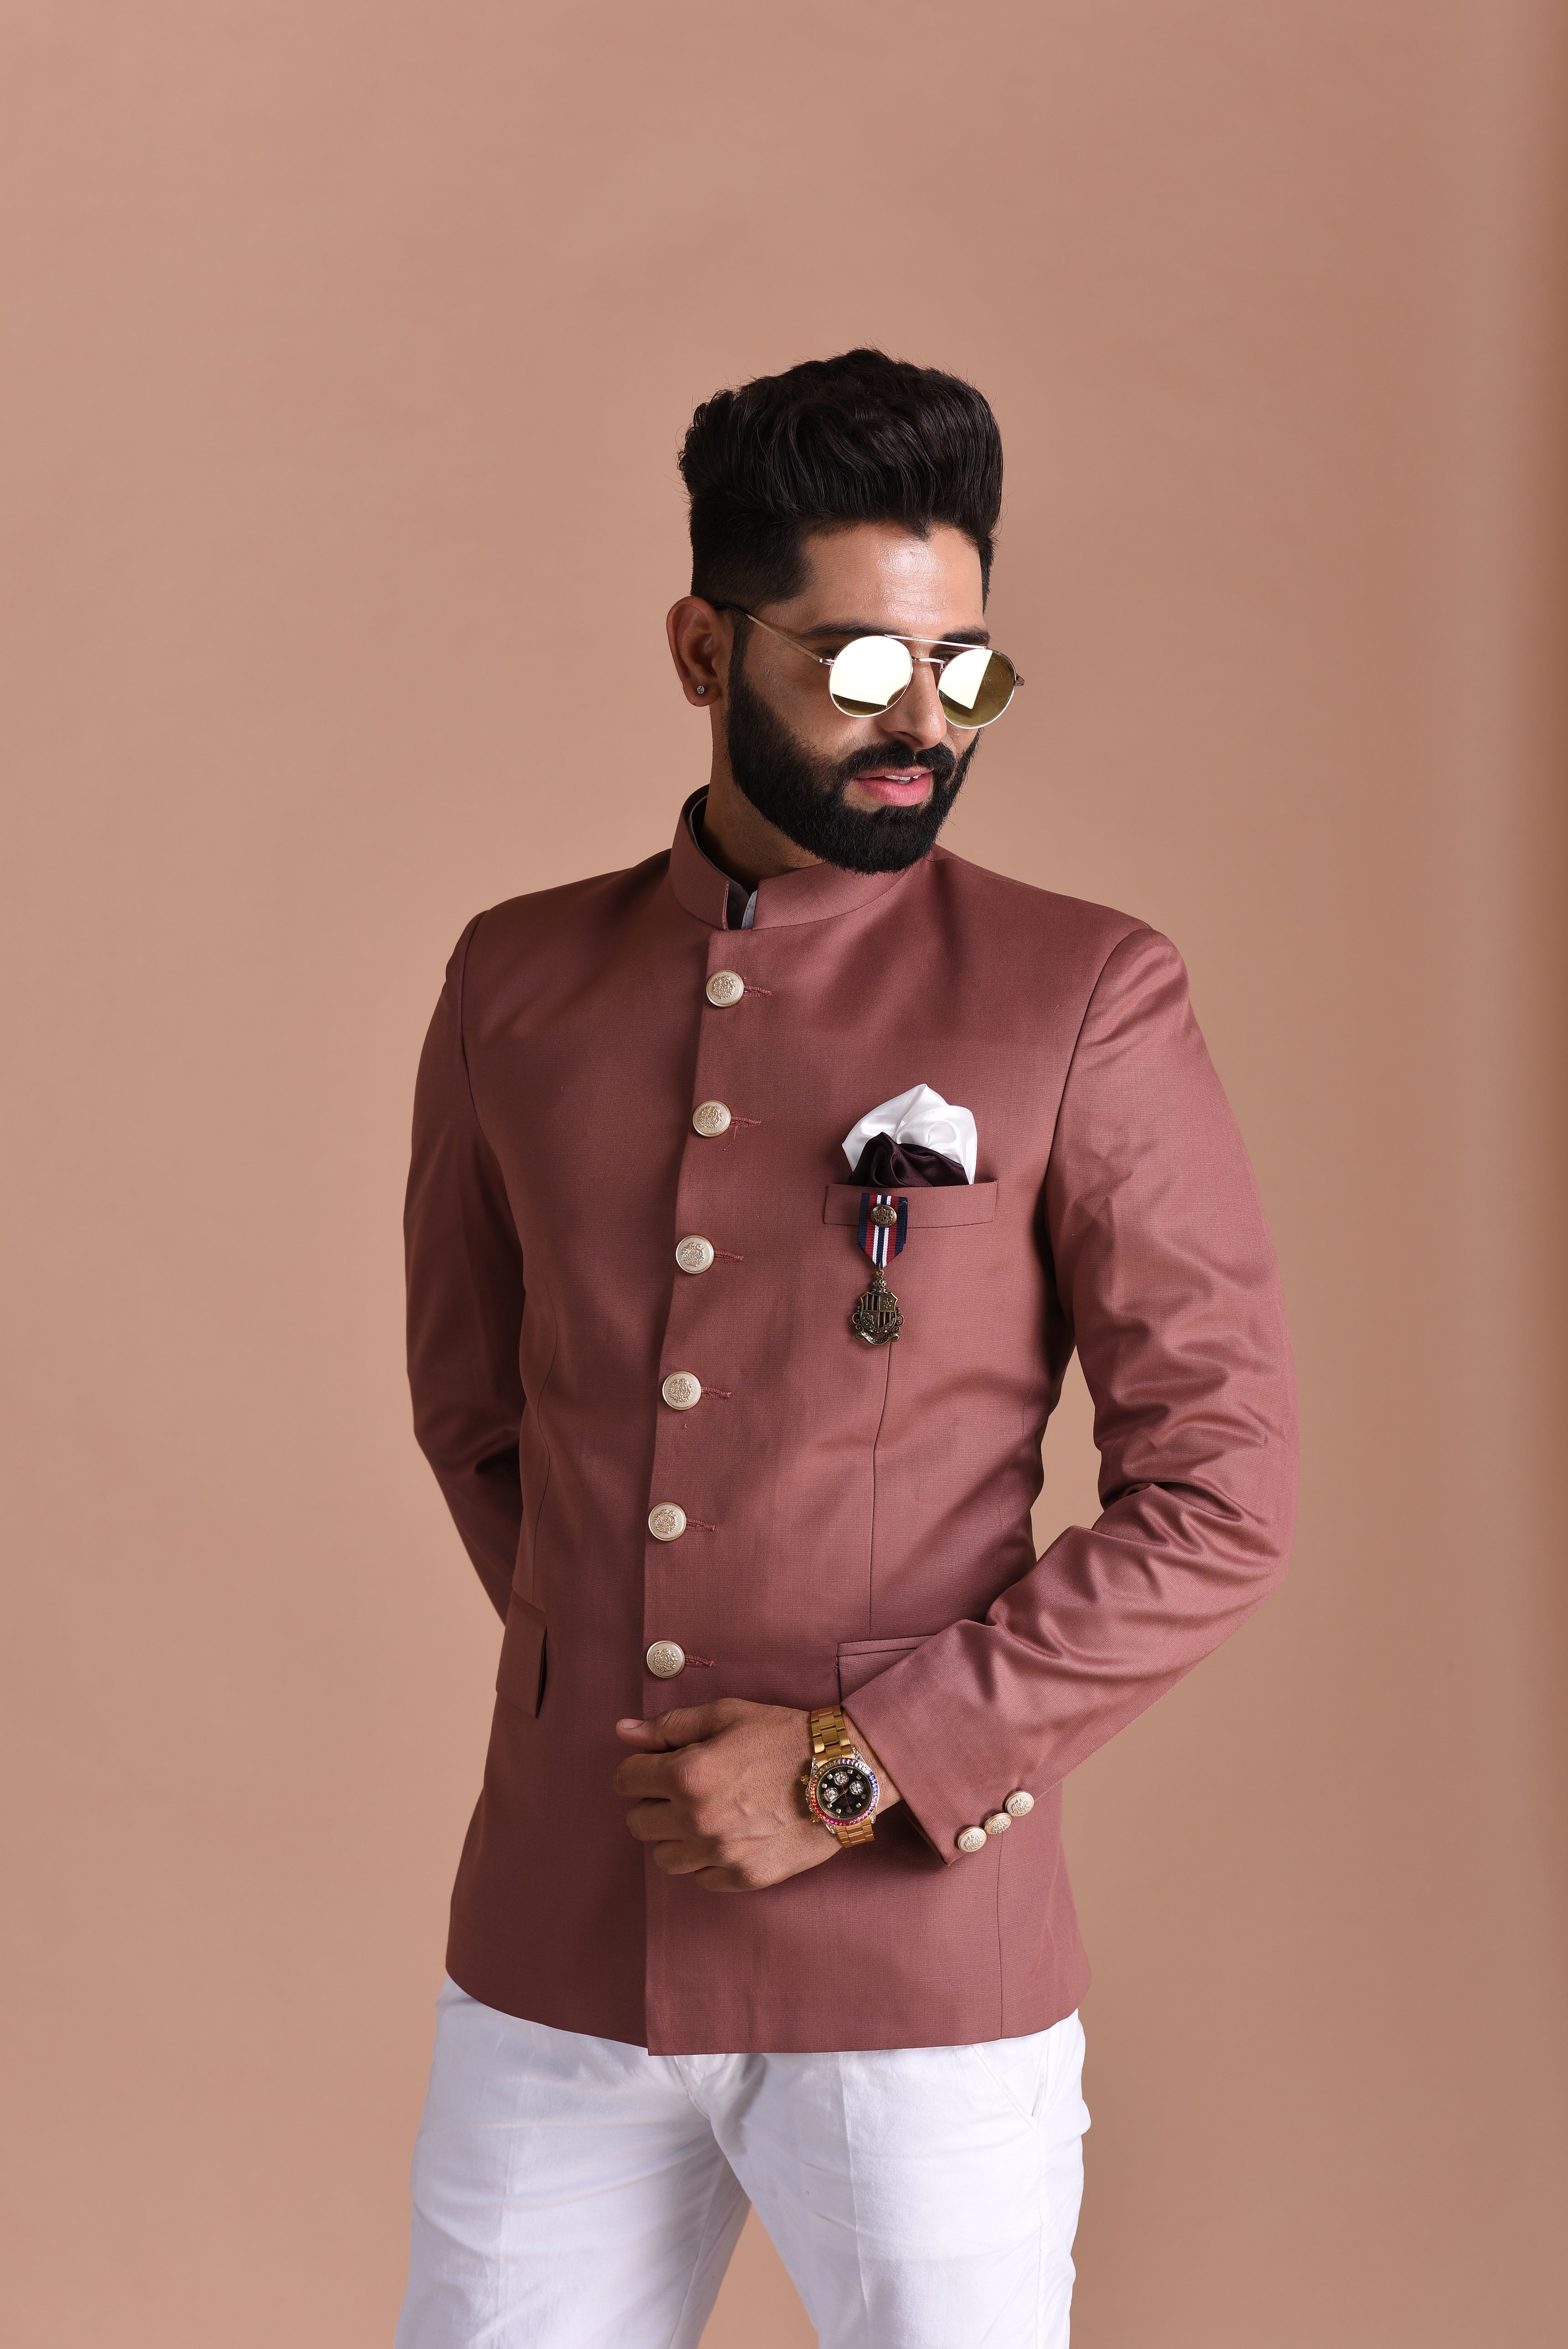 Stunning Rosewood Designer Jodhpuri Bandhgala  with White Trouser| Partywear for Grooms and Friends | Wedding Family Functions |open lawn party